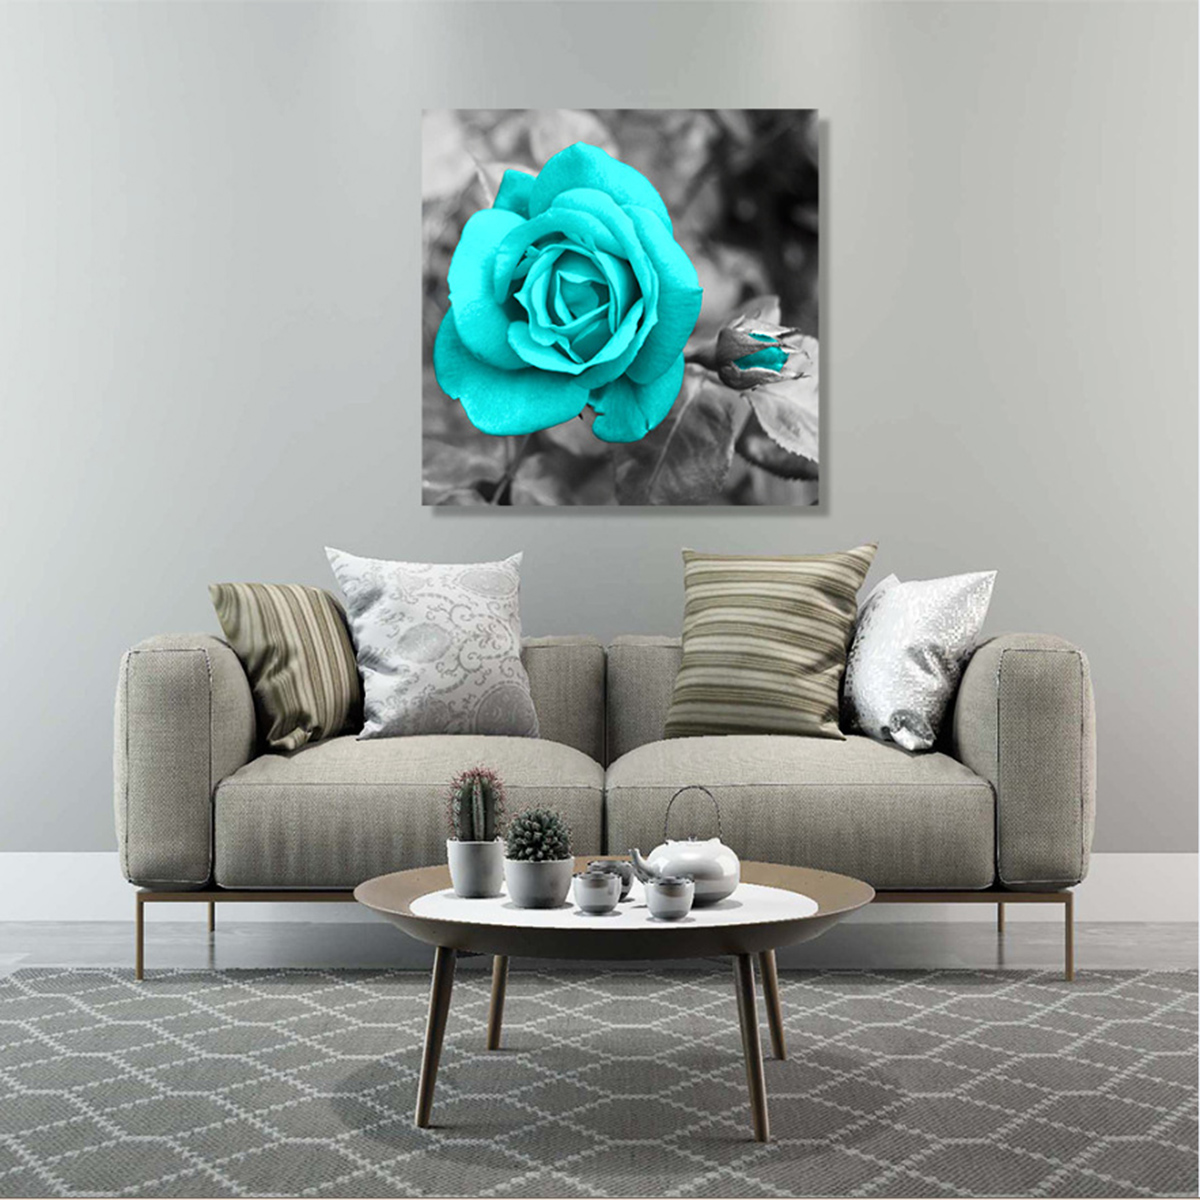 Blue-Rose-Canvas-Painting-Wall-Decorative-Print-Art-Pictures-Unframed-Wall-Hanging-Home-Office-Wall--1778176-7